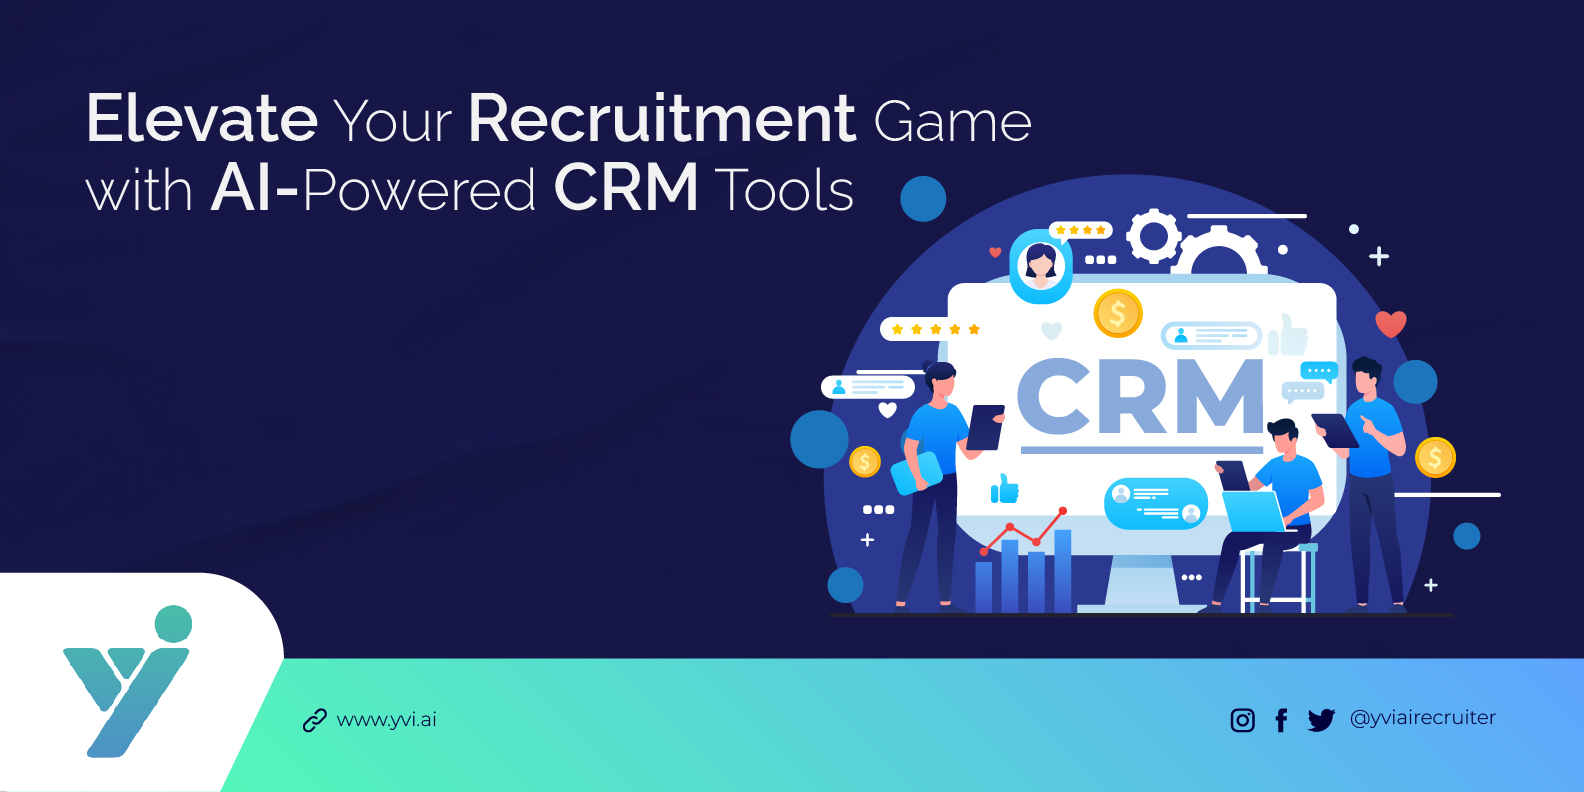 Candidate relationship management (CRM) tools for AI recruitment